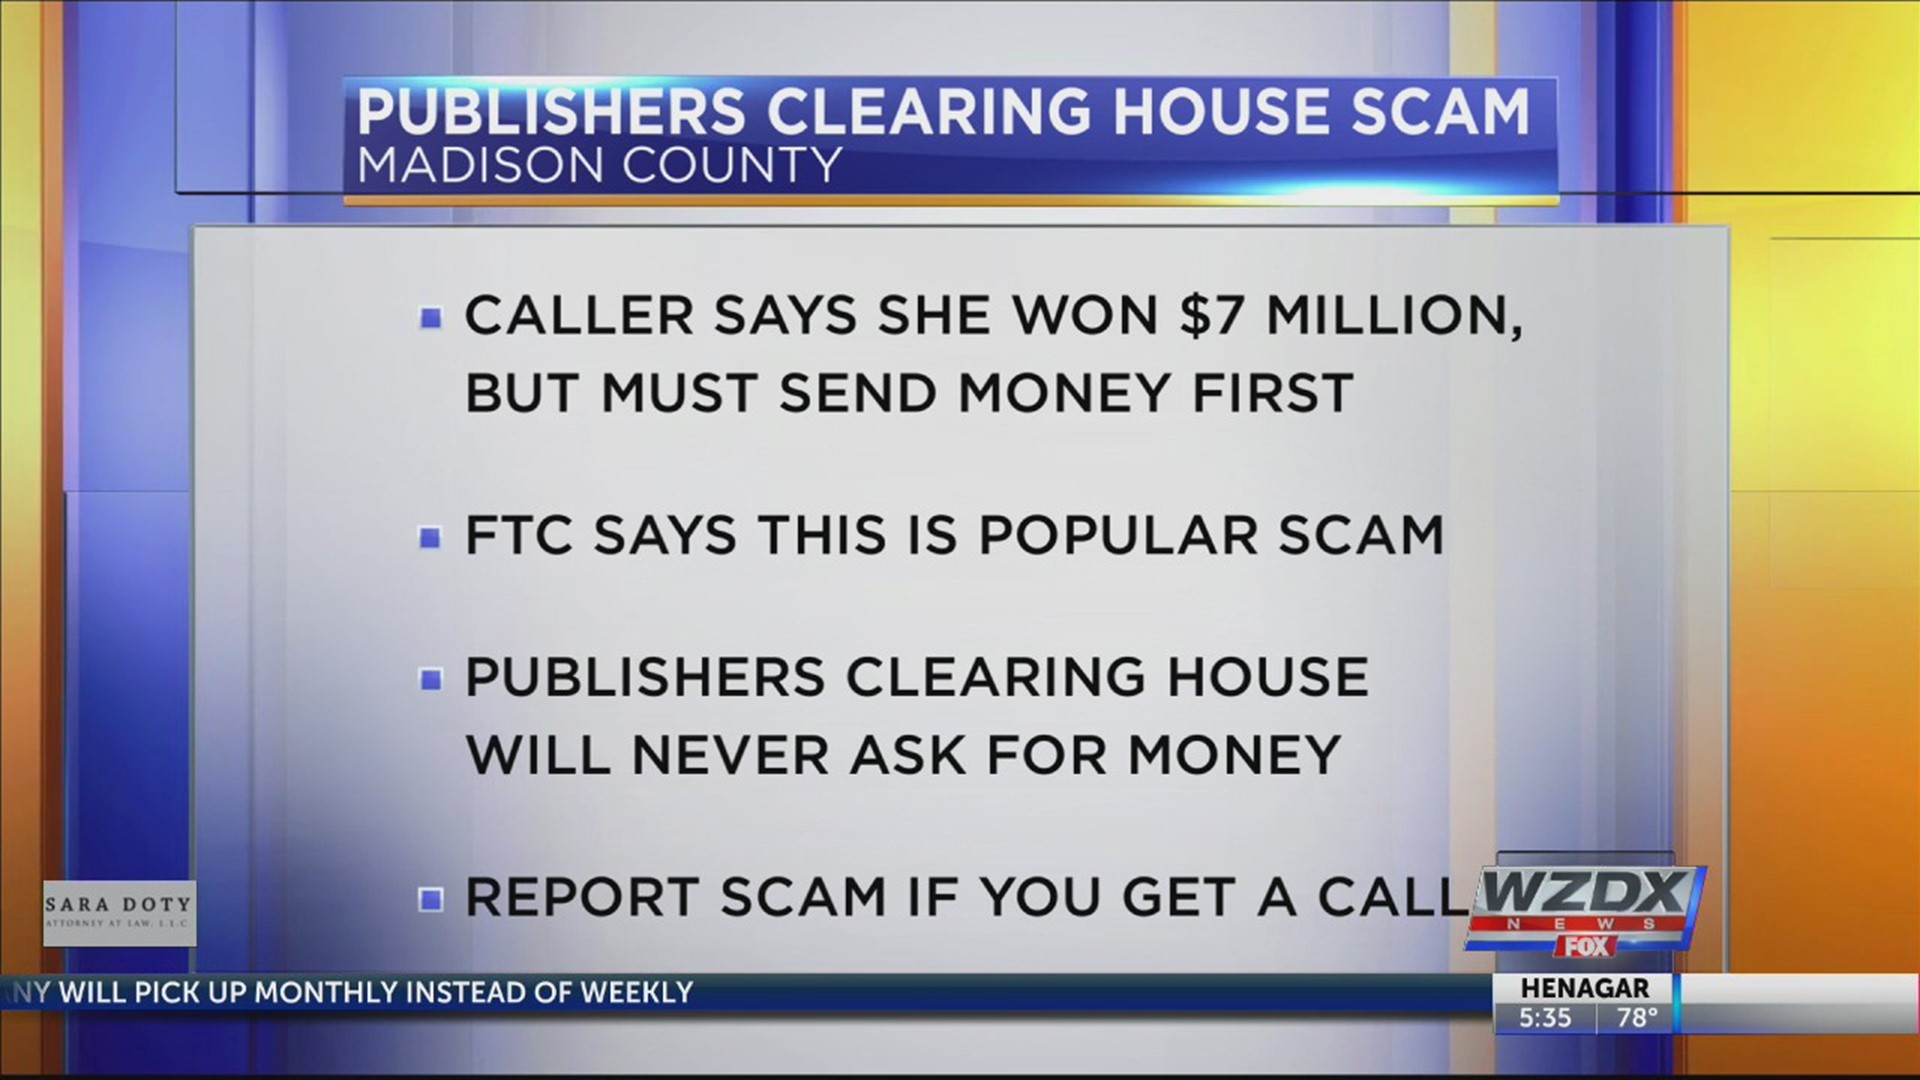 Deputies say a scammer called an elderly woman and told her she had won more than seven million dollars from the Publishers Clearing House, but they said to collect her winnings, she had to send them $900.